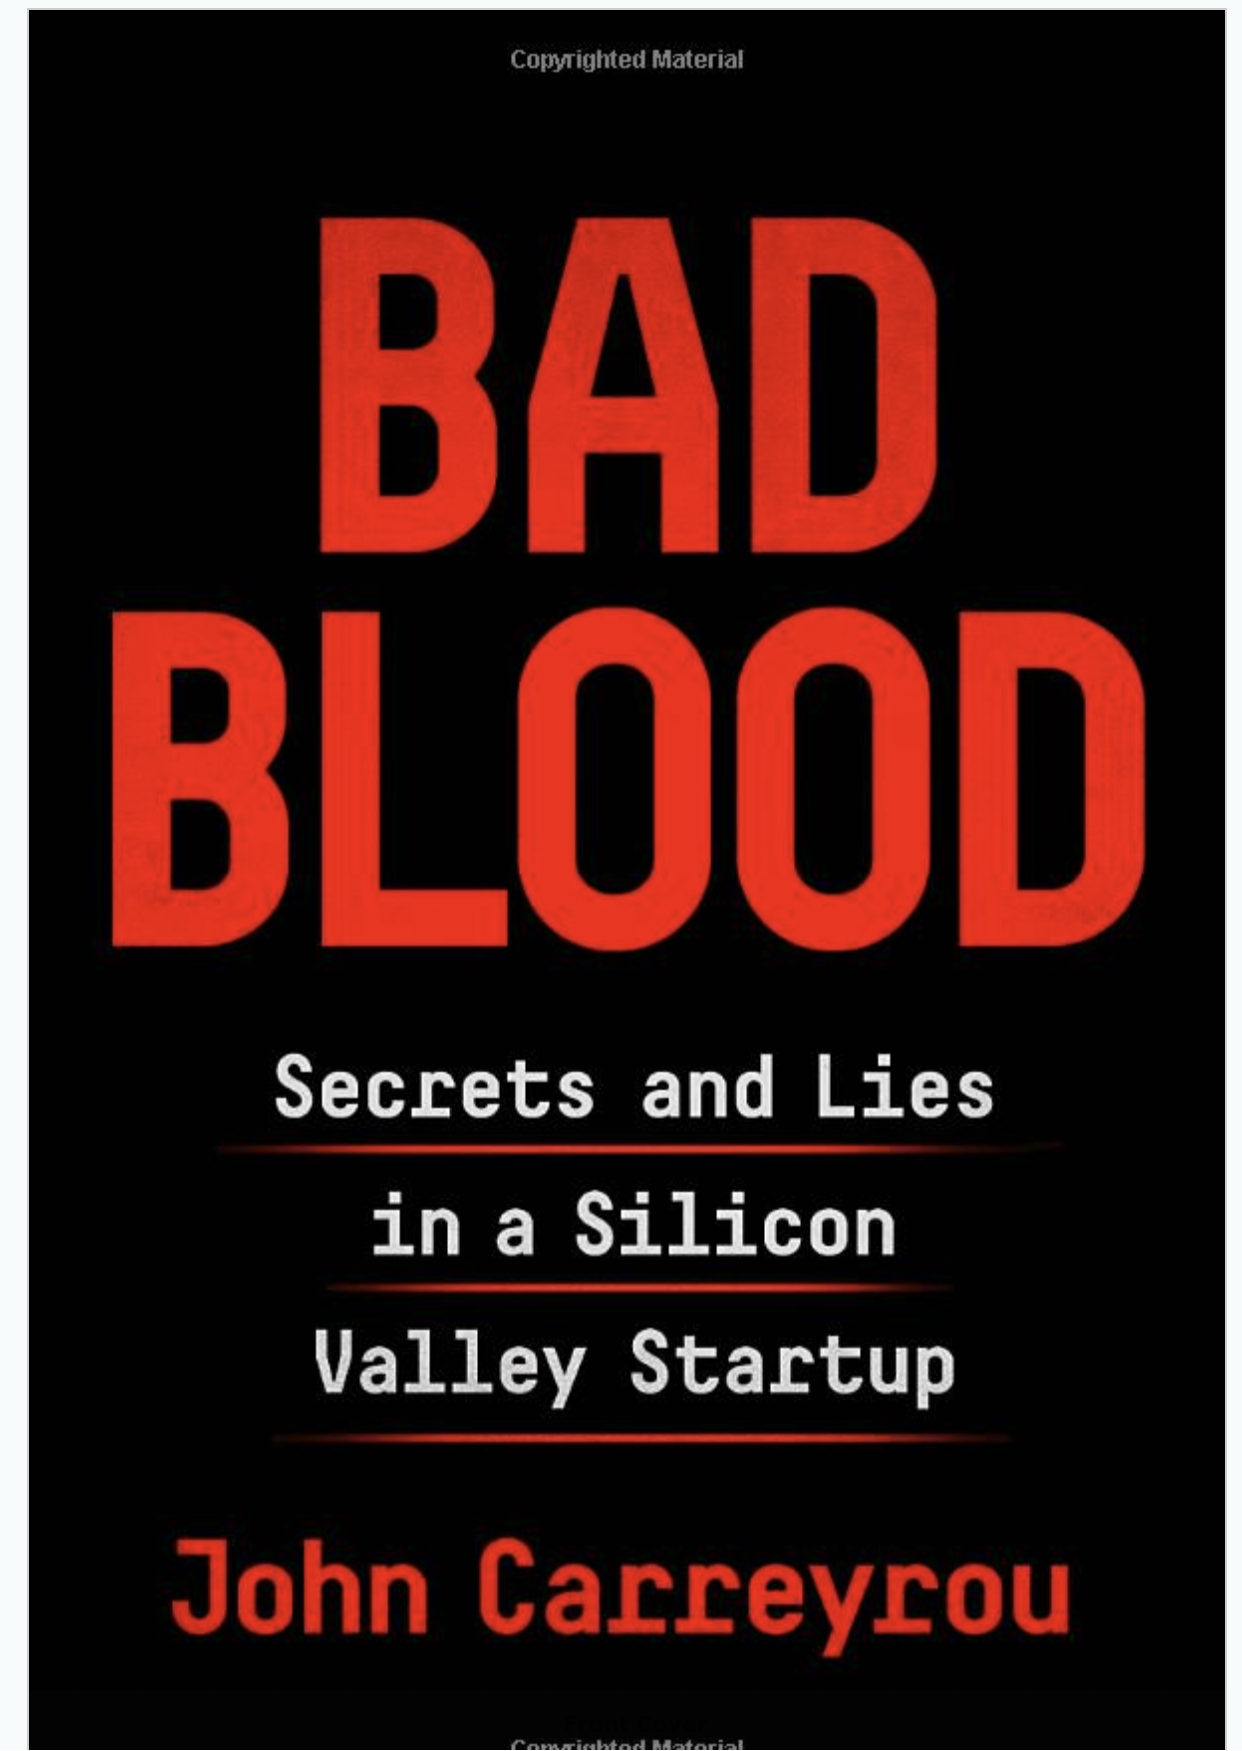 SUMMARY-BAD-BLOOD-BY-JOHN-CARREYROU-Secrets-and-Lies-in-a-Silicon-Valley-Startup